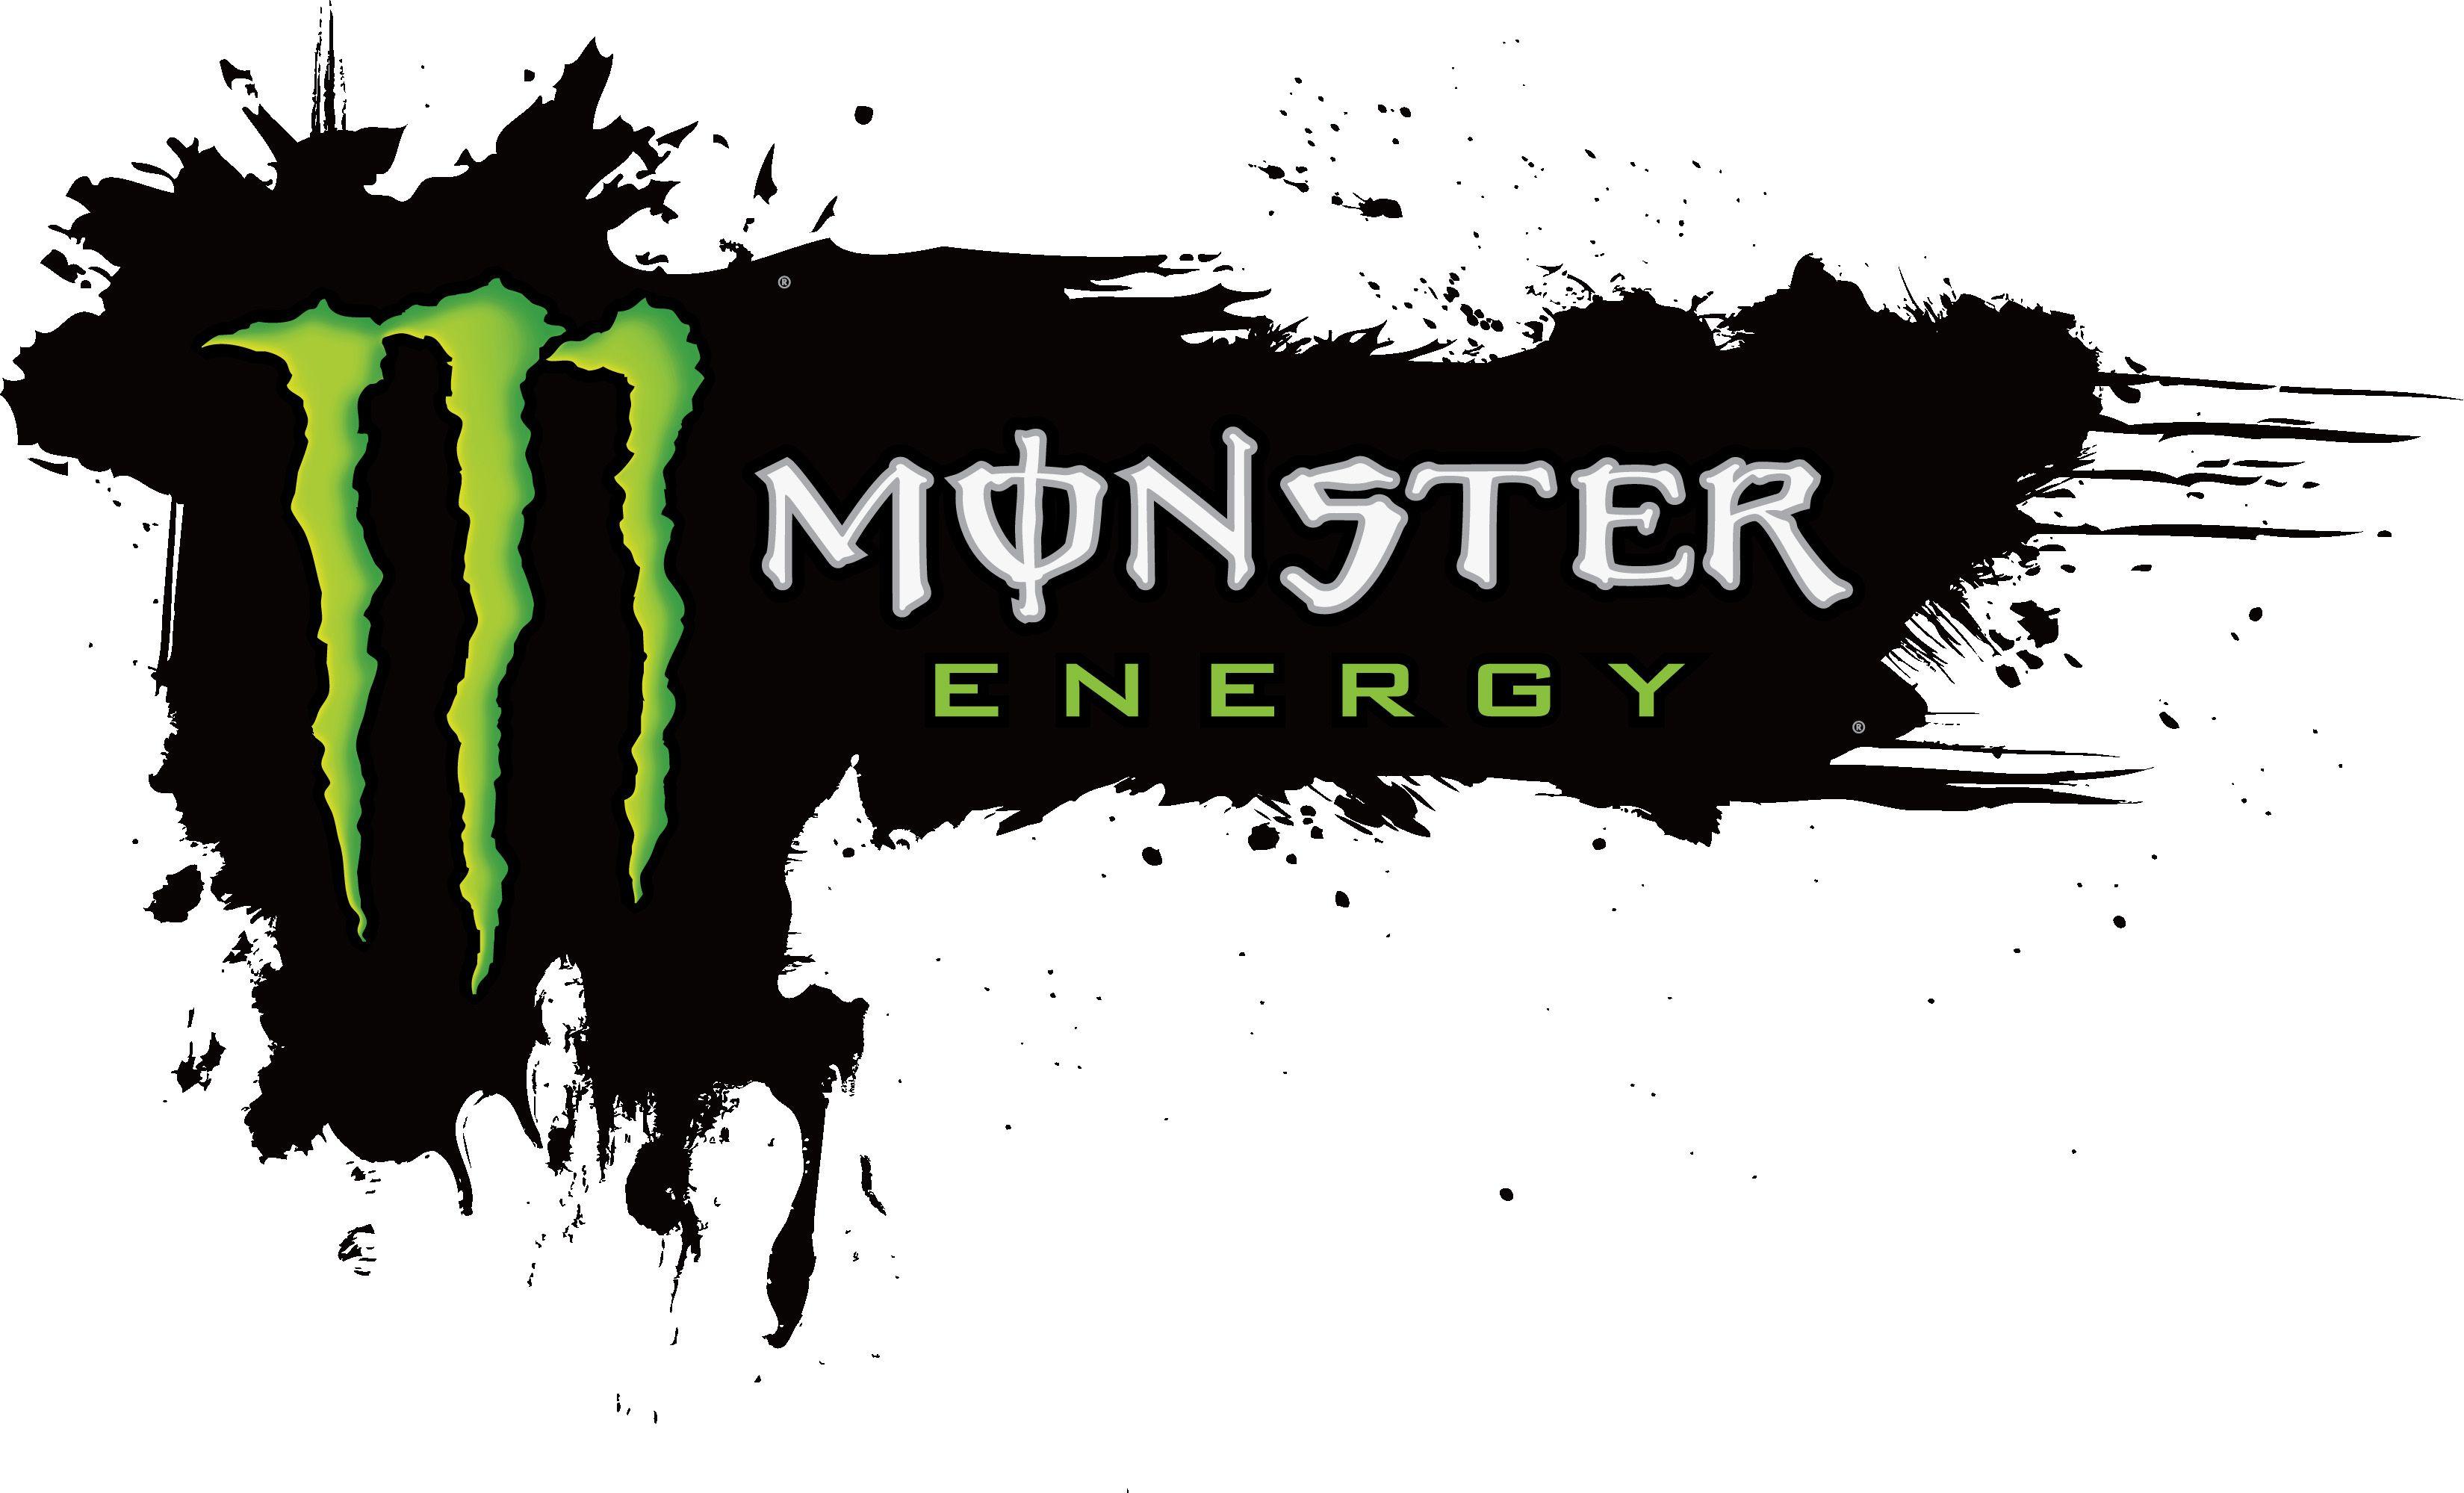 Monster Logo - Monster Energy Logo, Monster Energy Symbol, Meaning, History and ...